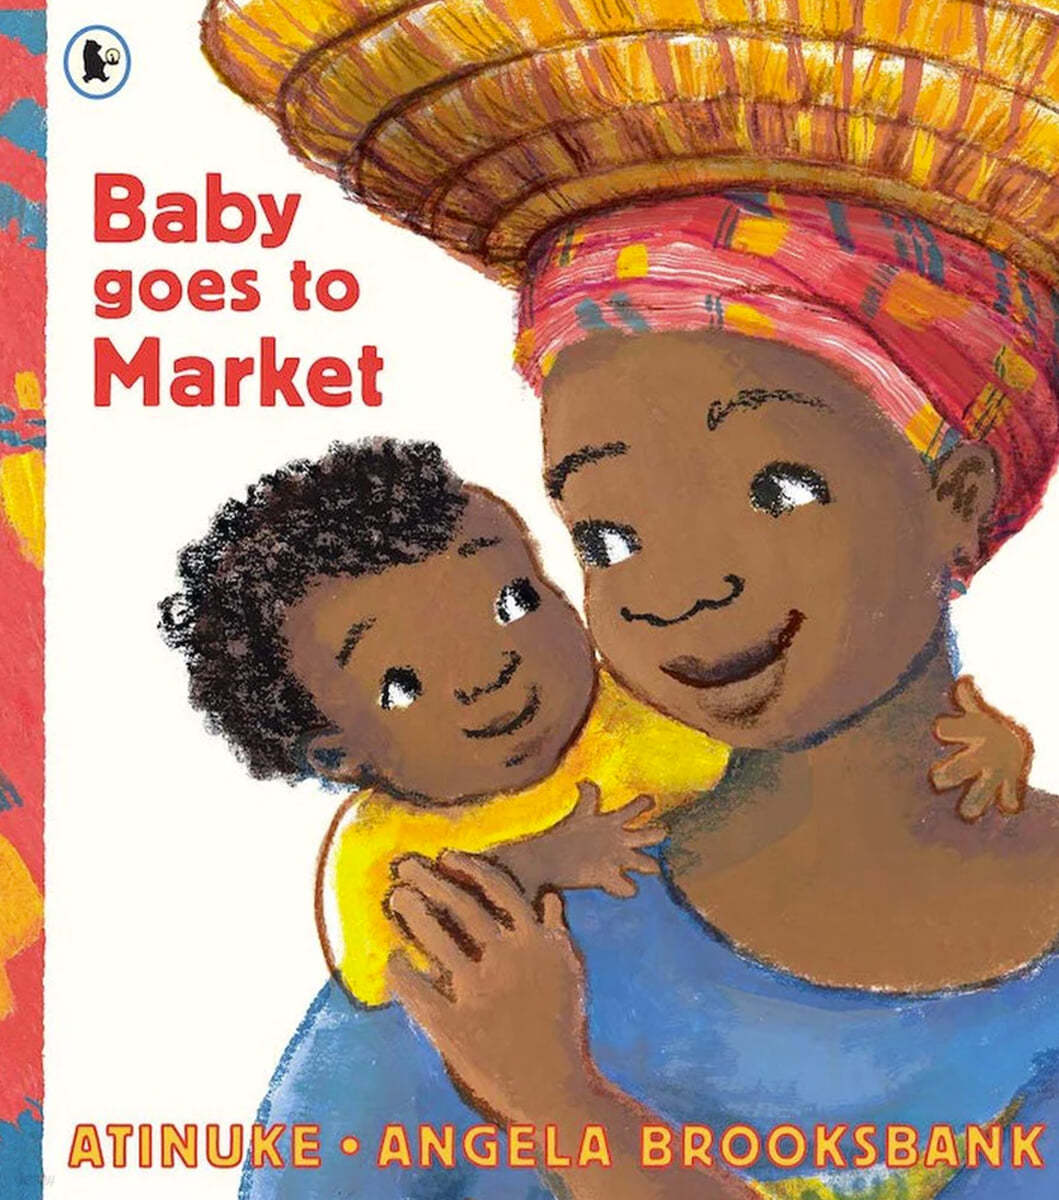 Baby goes to market